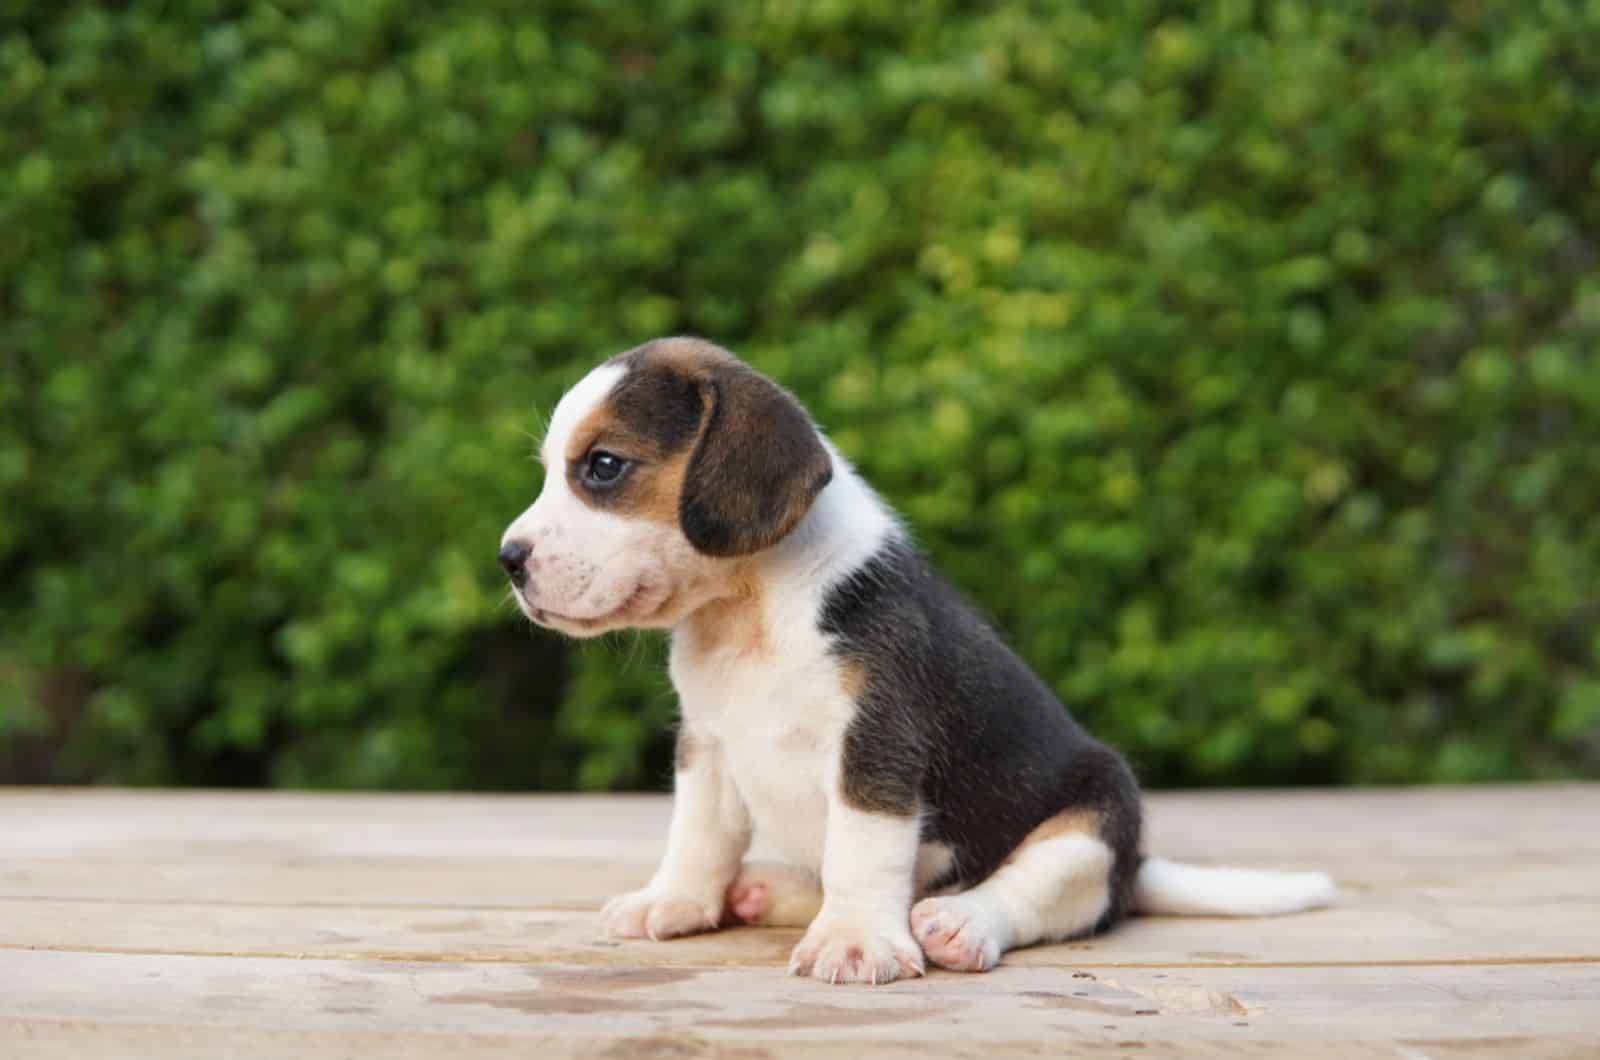 beagle puppy sitting on a wooden floor outdoors